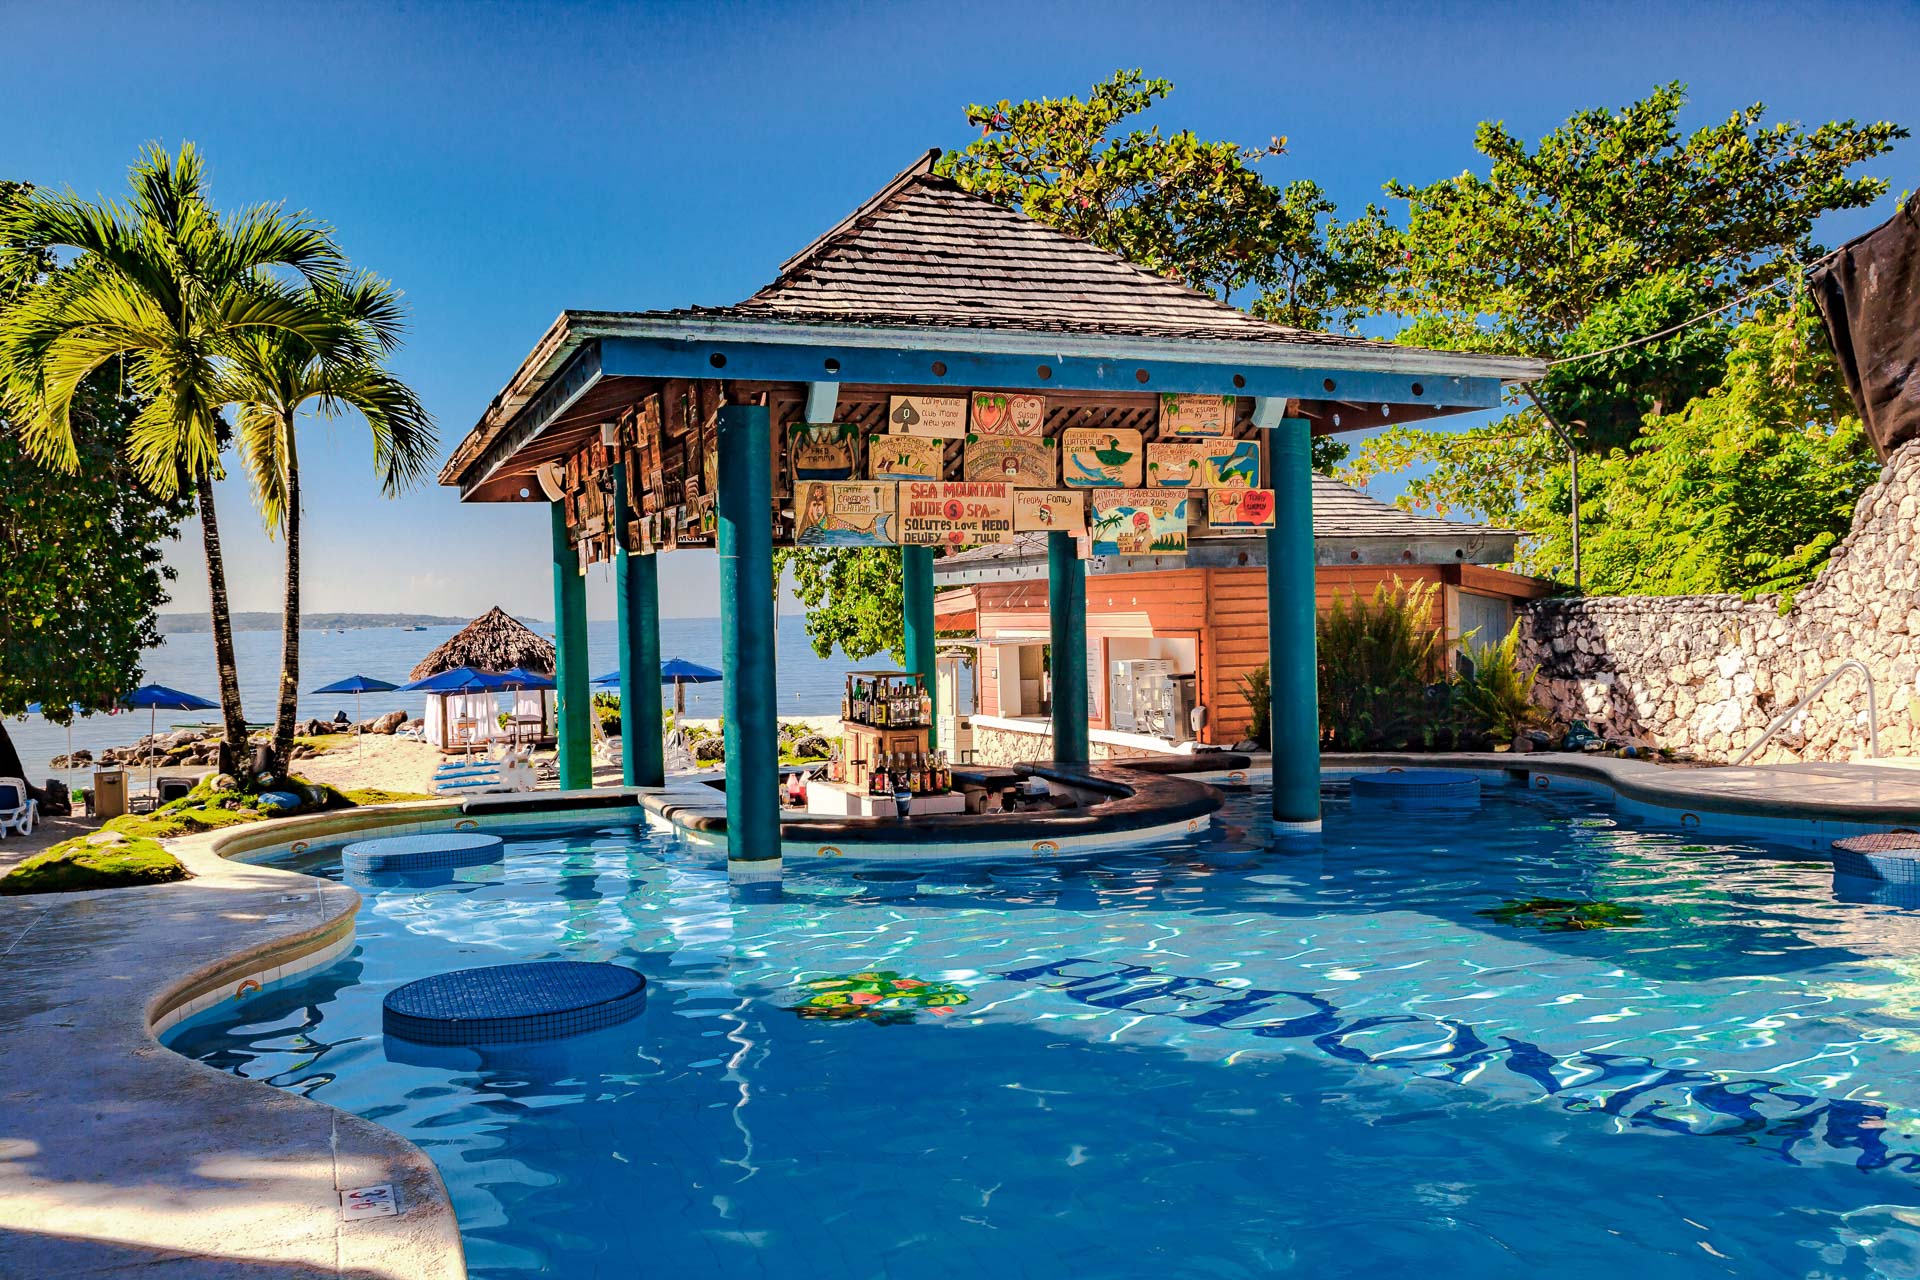 This is Hedonism Exploring Jamaicas Luxury “Adults-Only” Playground